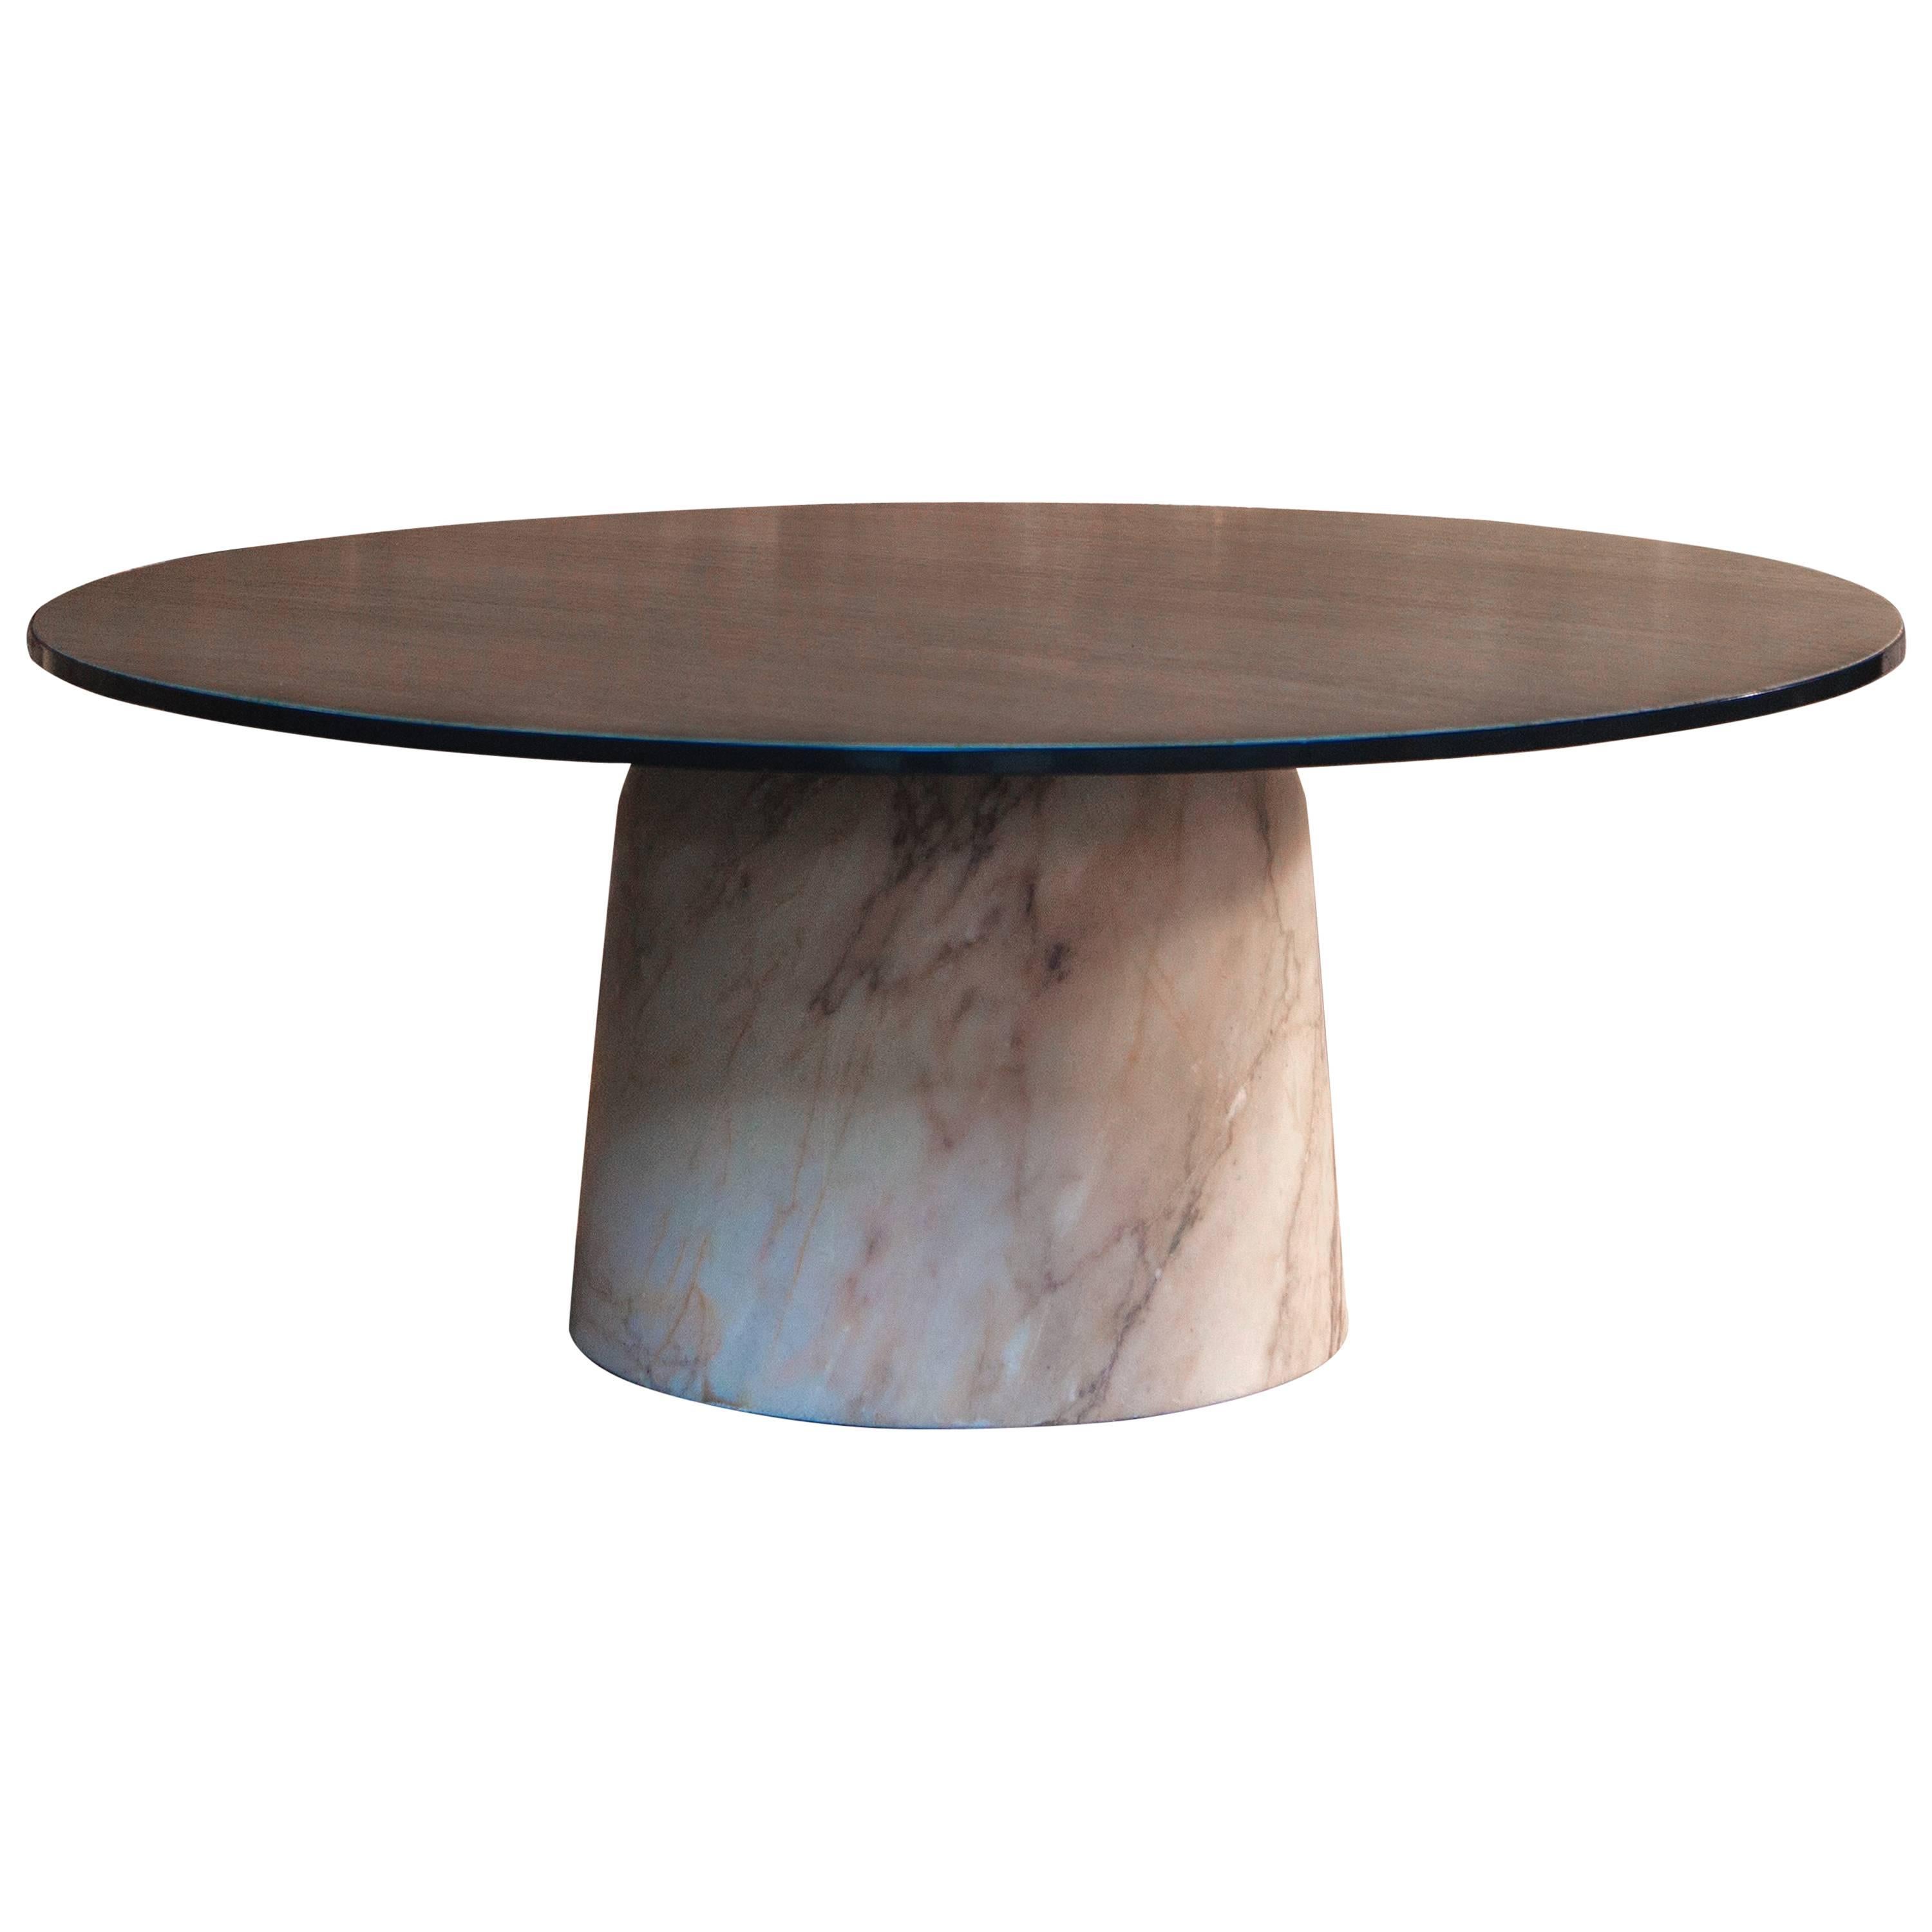 European Modern Marble and Timber Round Coffee Table from France For Sale